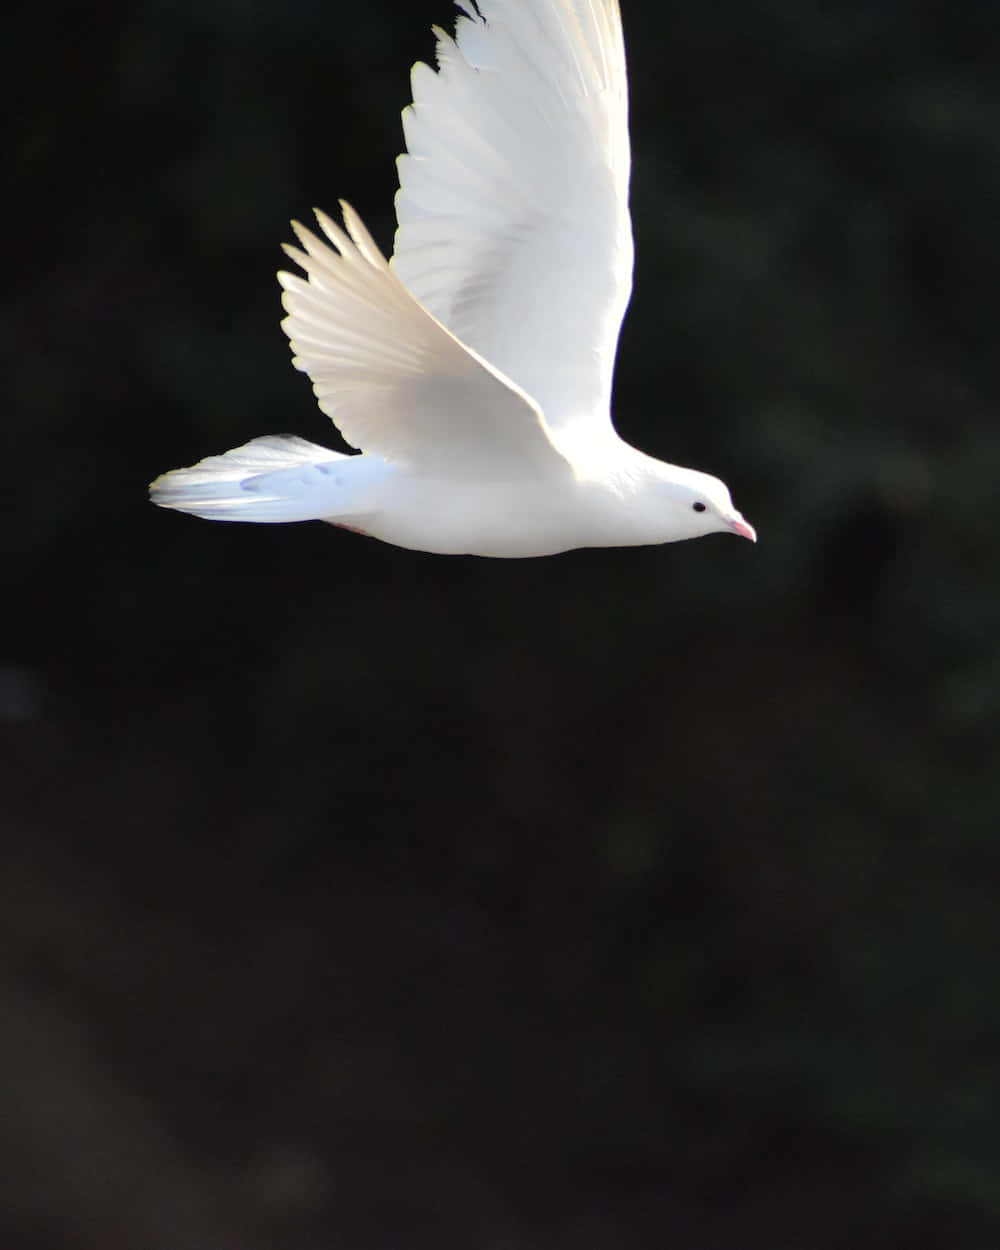 A close-up of a white dove, a symbol for peace and hope